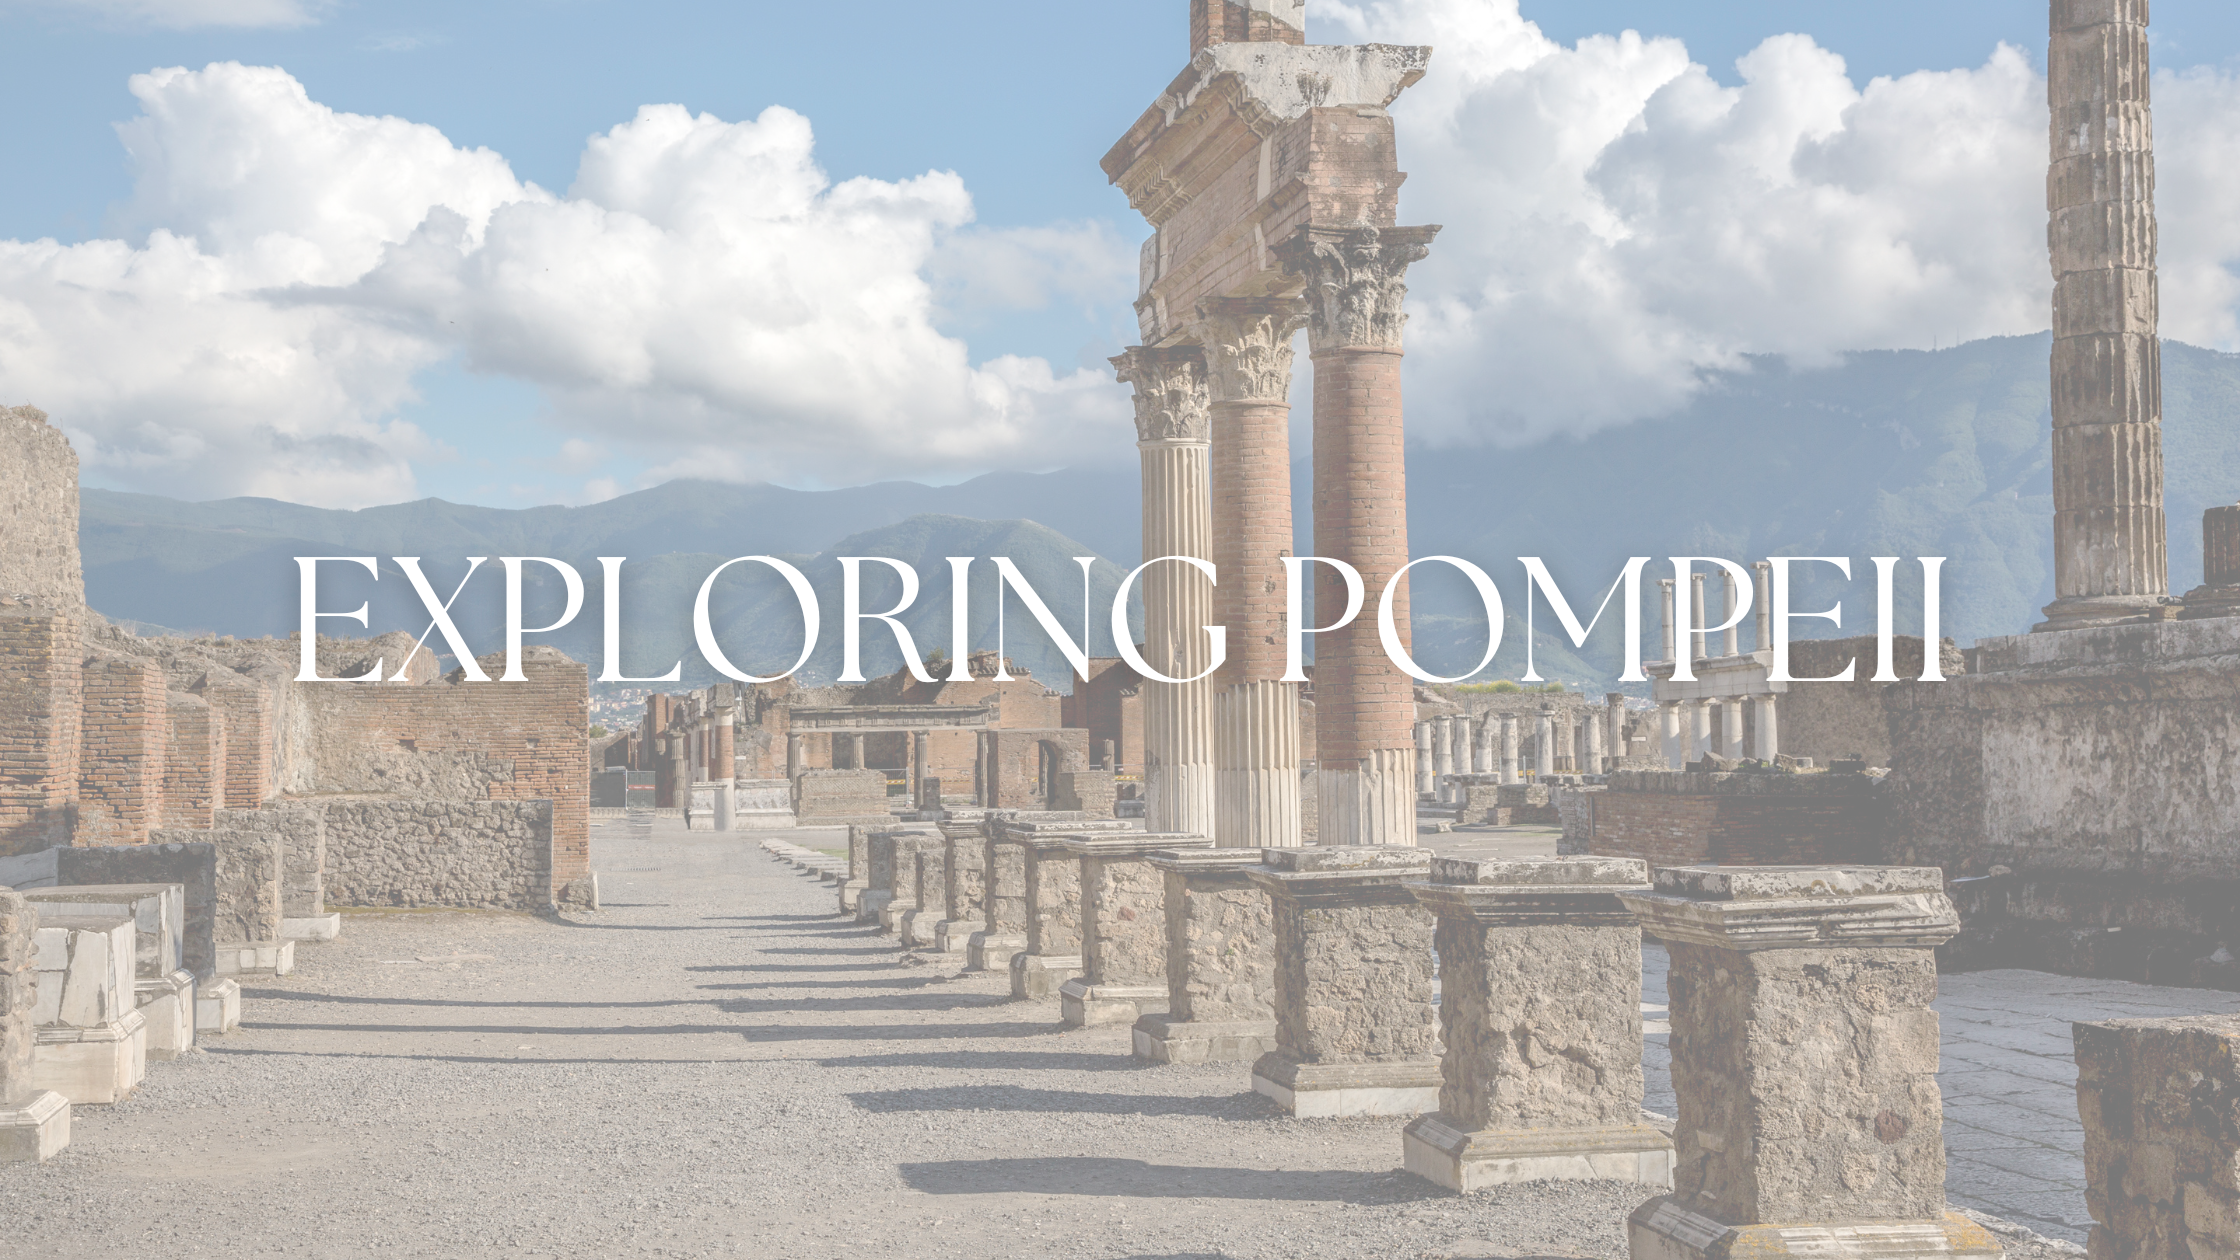 Exploring Pompeii on The Second Day of Our Cruise